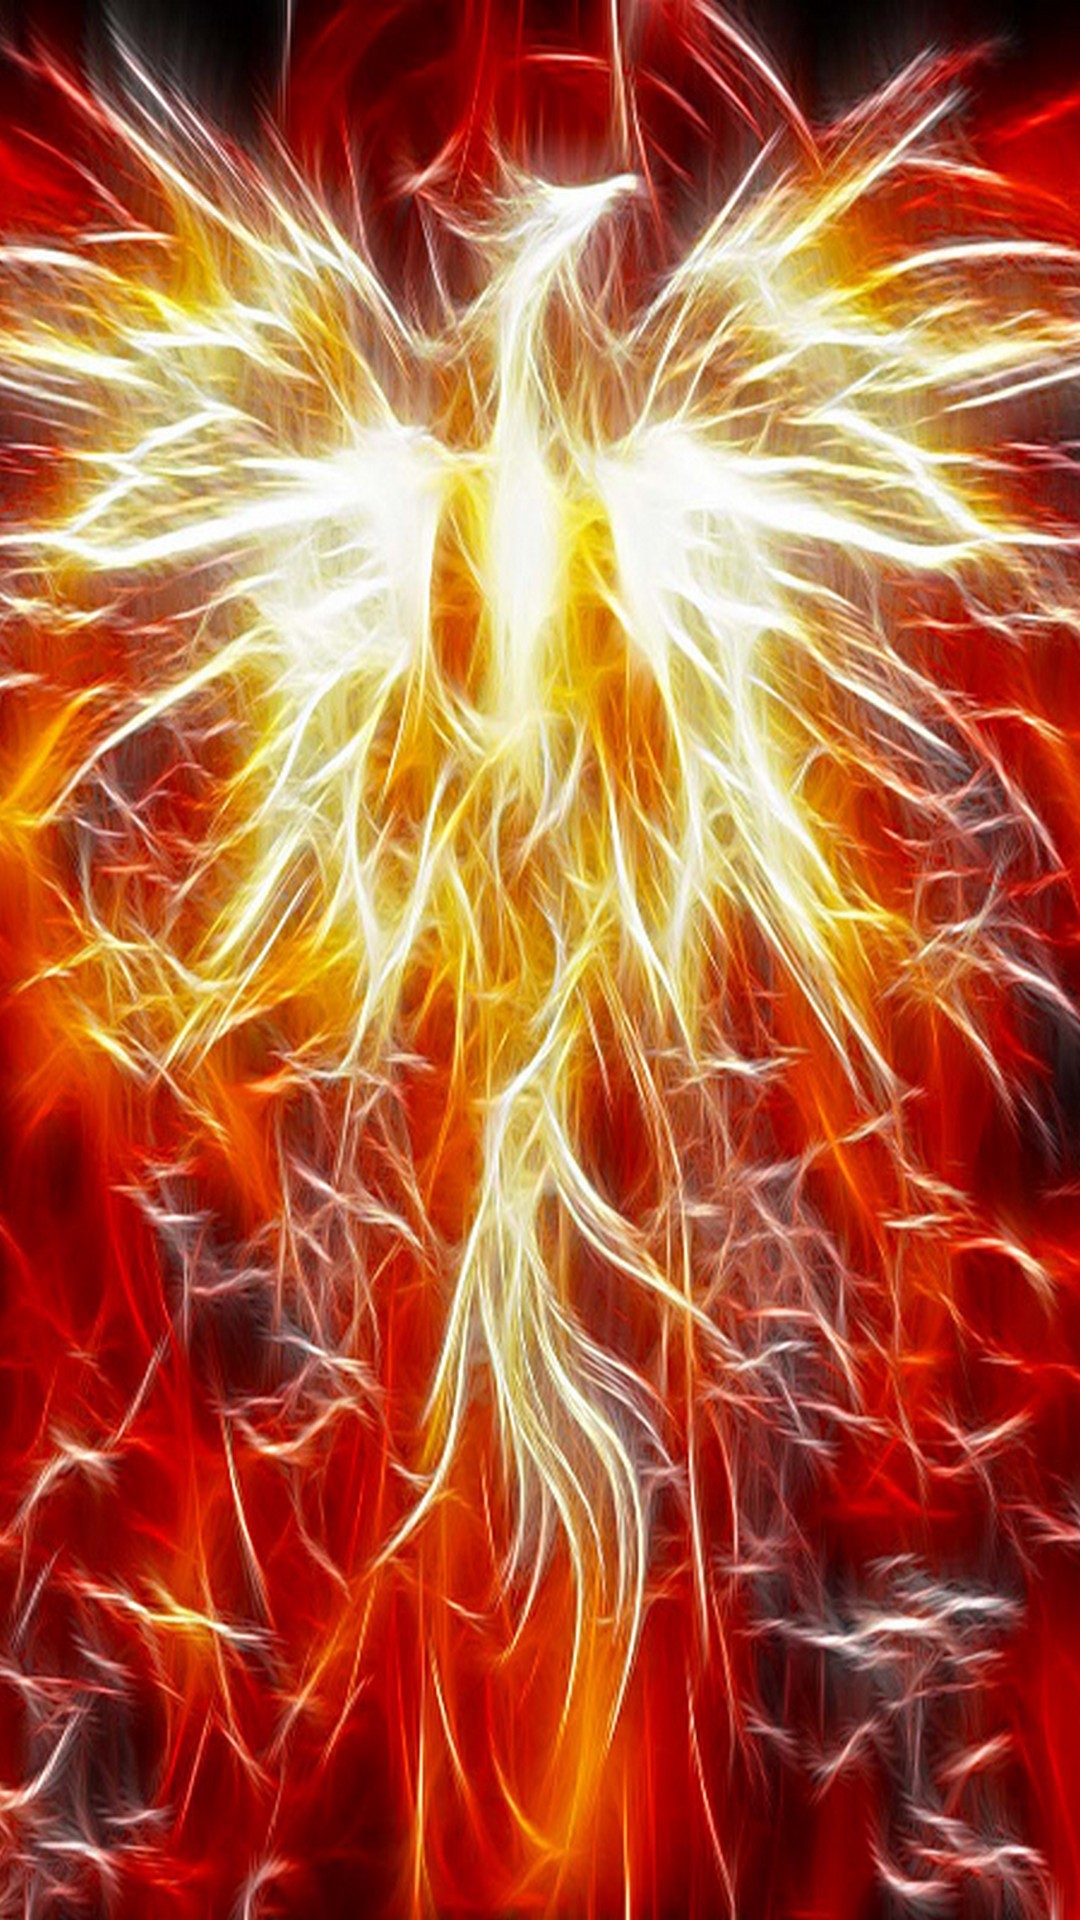 Wallpaper Phoenix Images iPhone with image resolution 1080x1920 pixel. You can make this wallpaper for your iPhone 5, 6, 7, 8, X backgrounds, Mobile Screensaver, or iPad Lock Screen